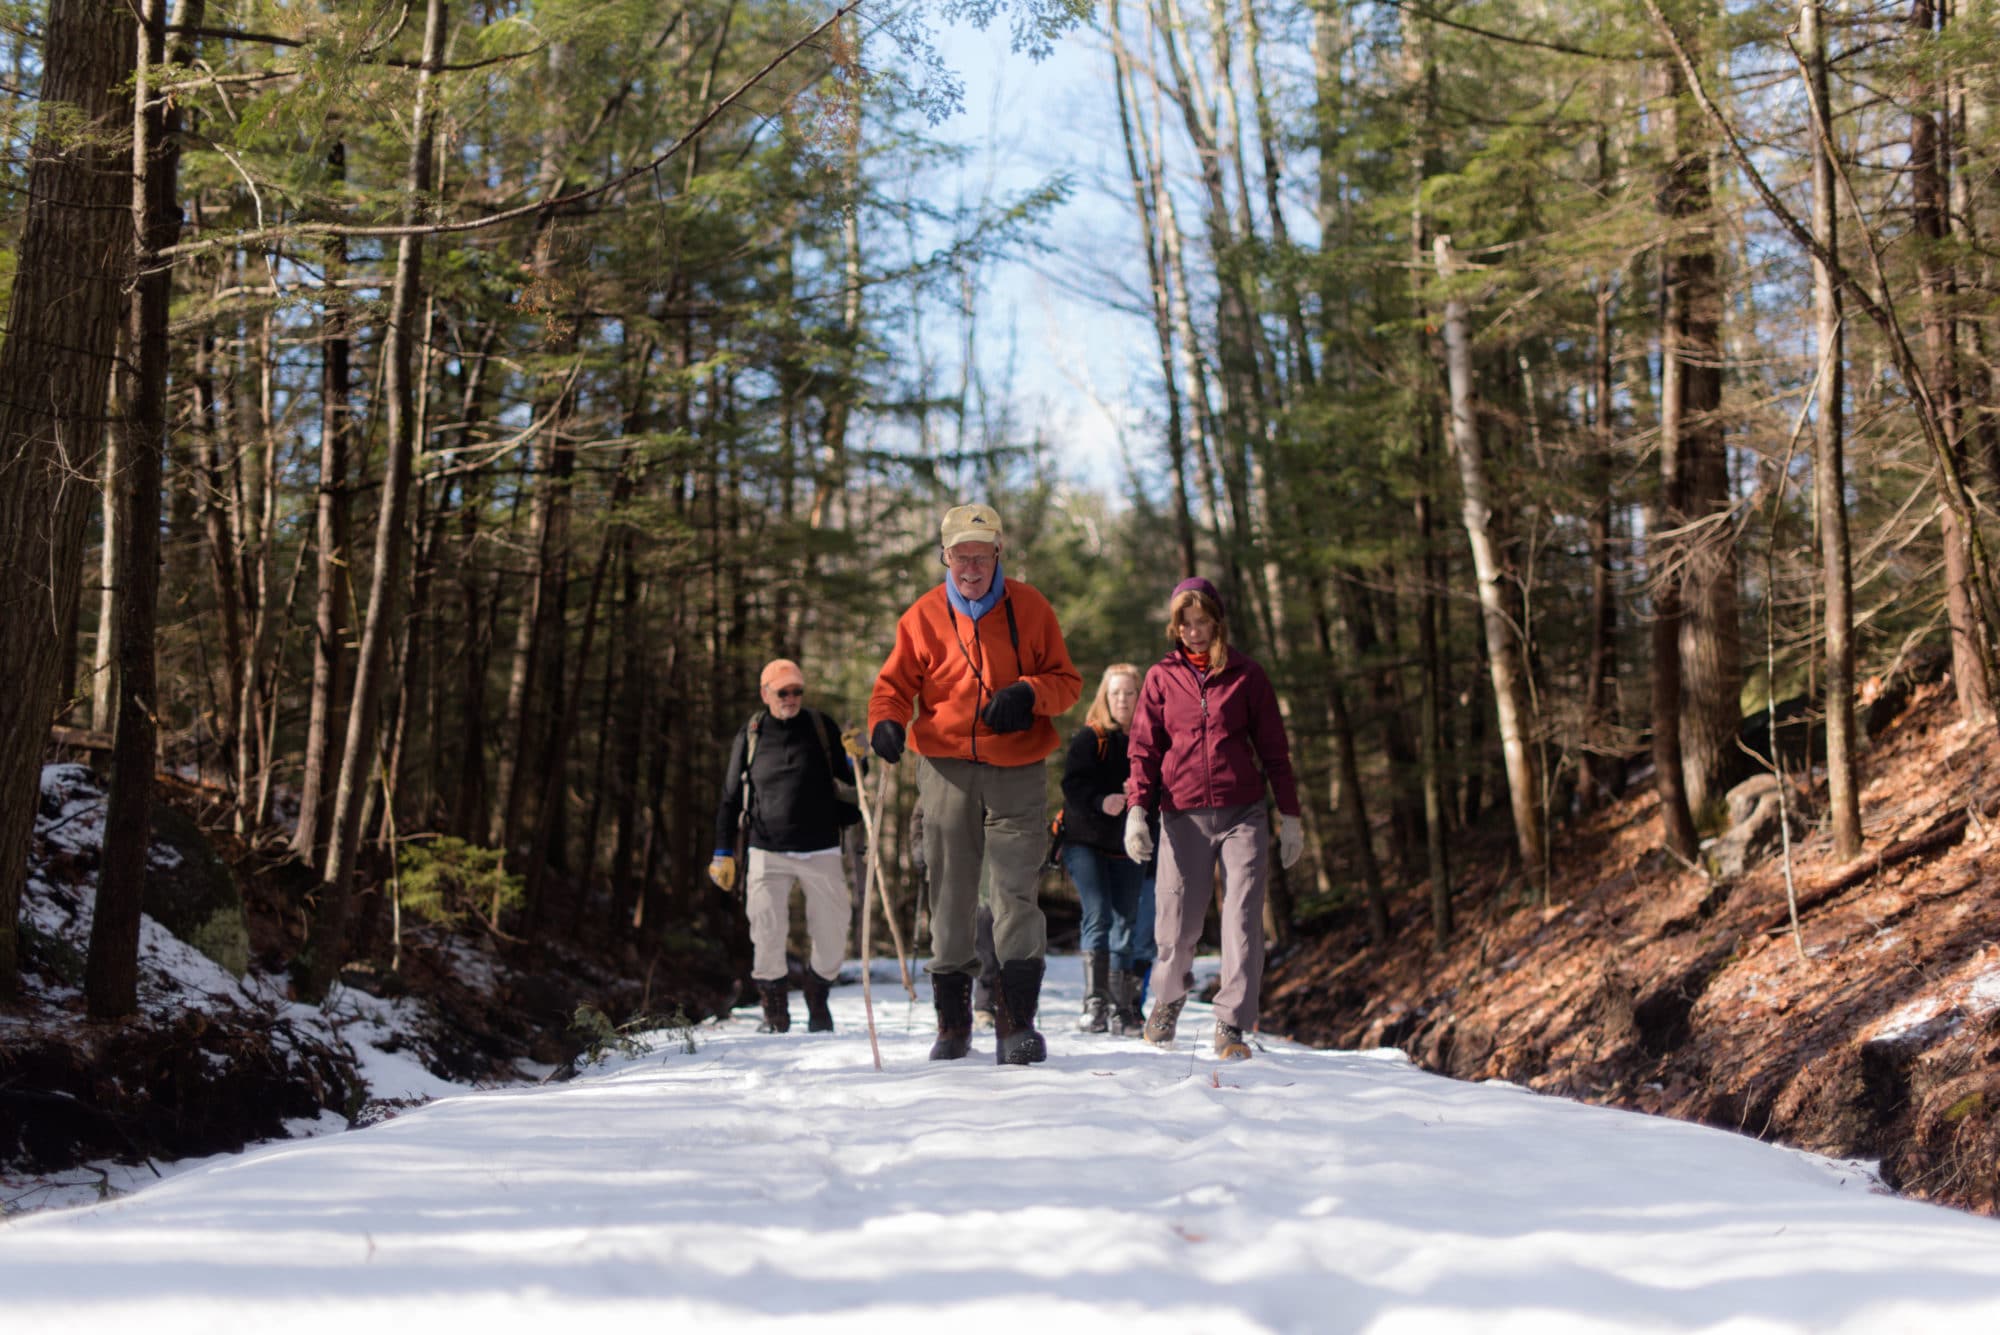 Meade Cadot leads a winter hike on the Harris Center's Jaquith Rail Trail. (photo © Ben Conant)